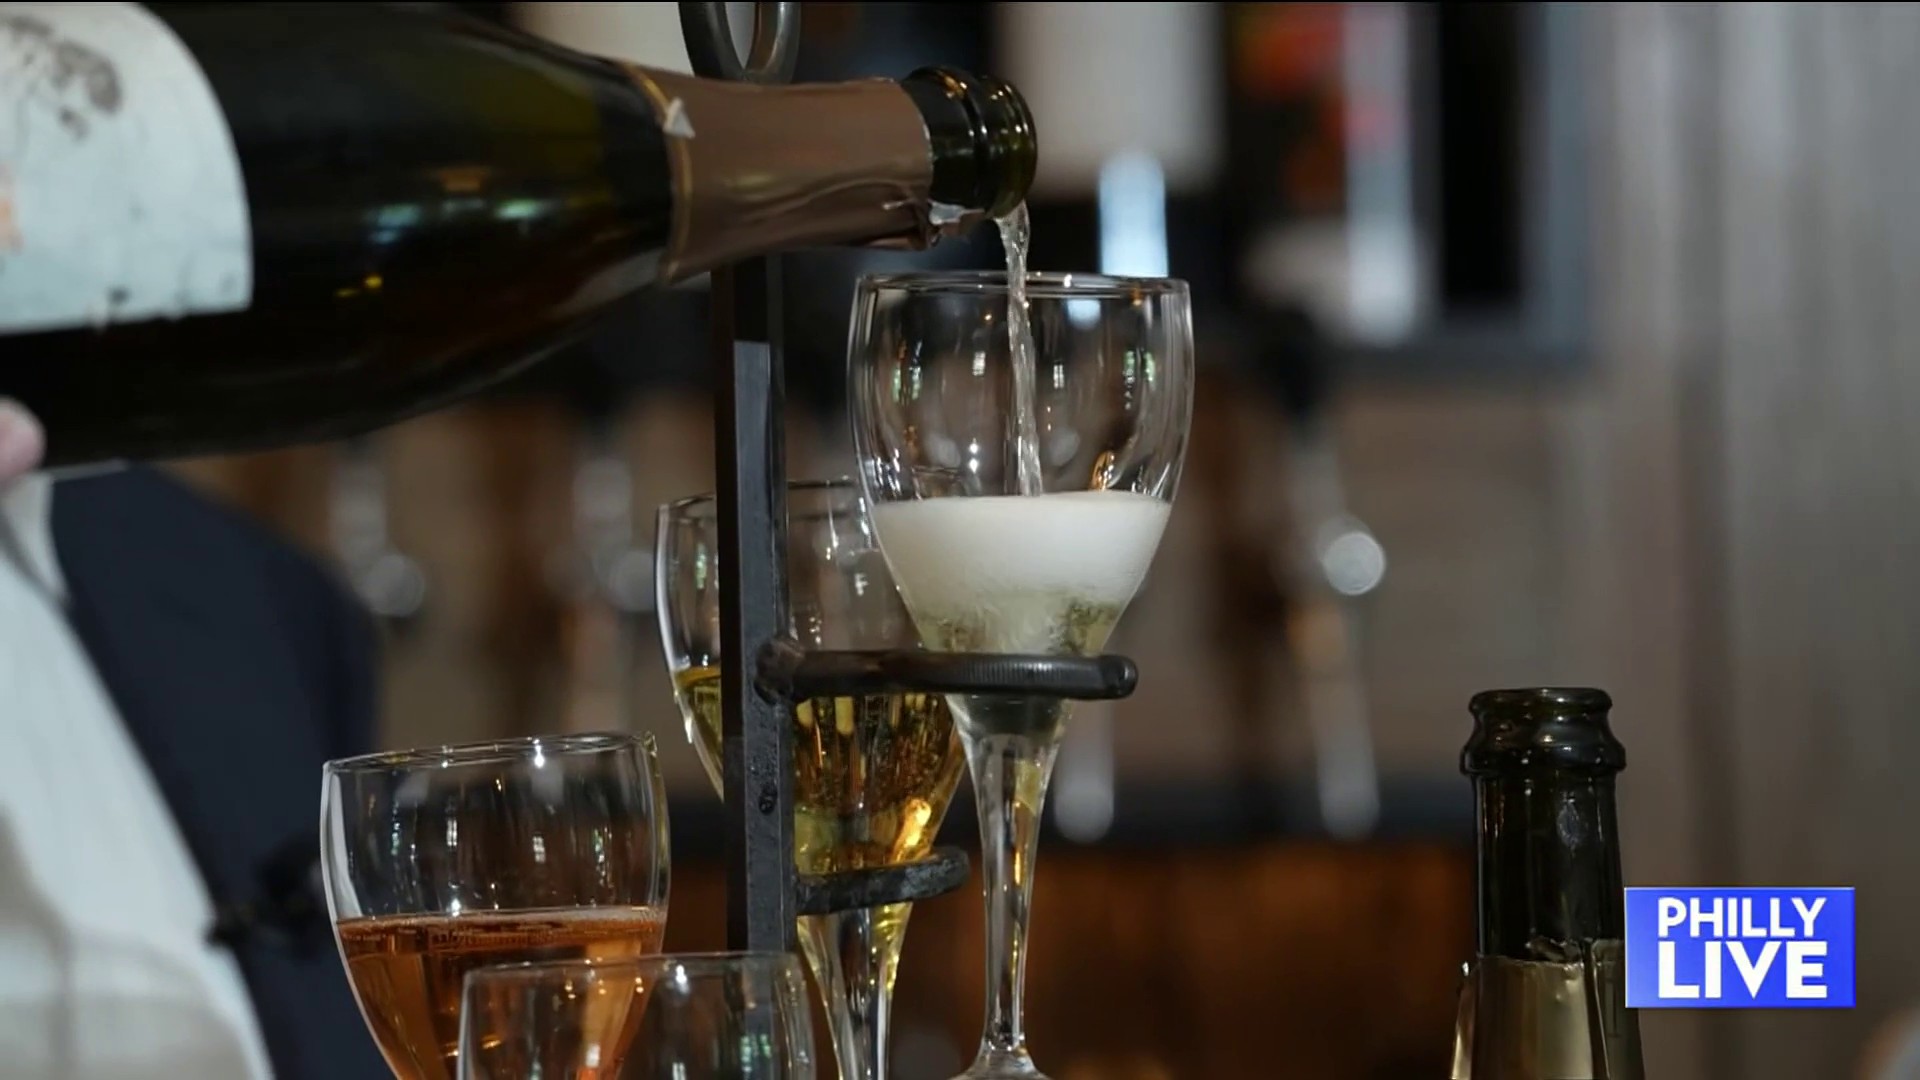 nbcphiladelphia.com - Travel the world of wine one glass at a time at this Old City restaurant